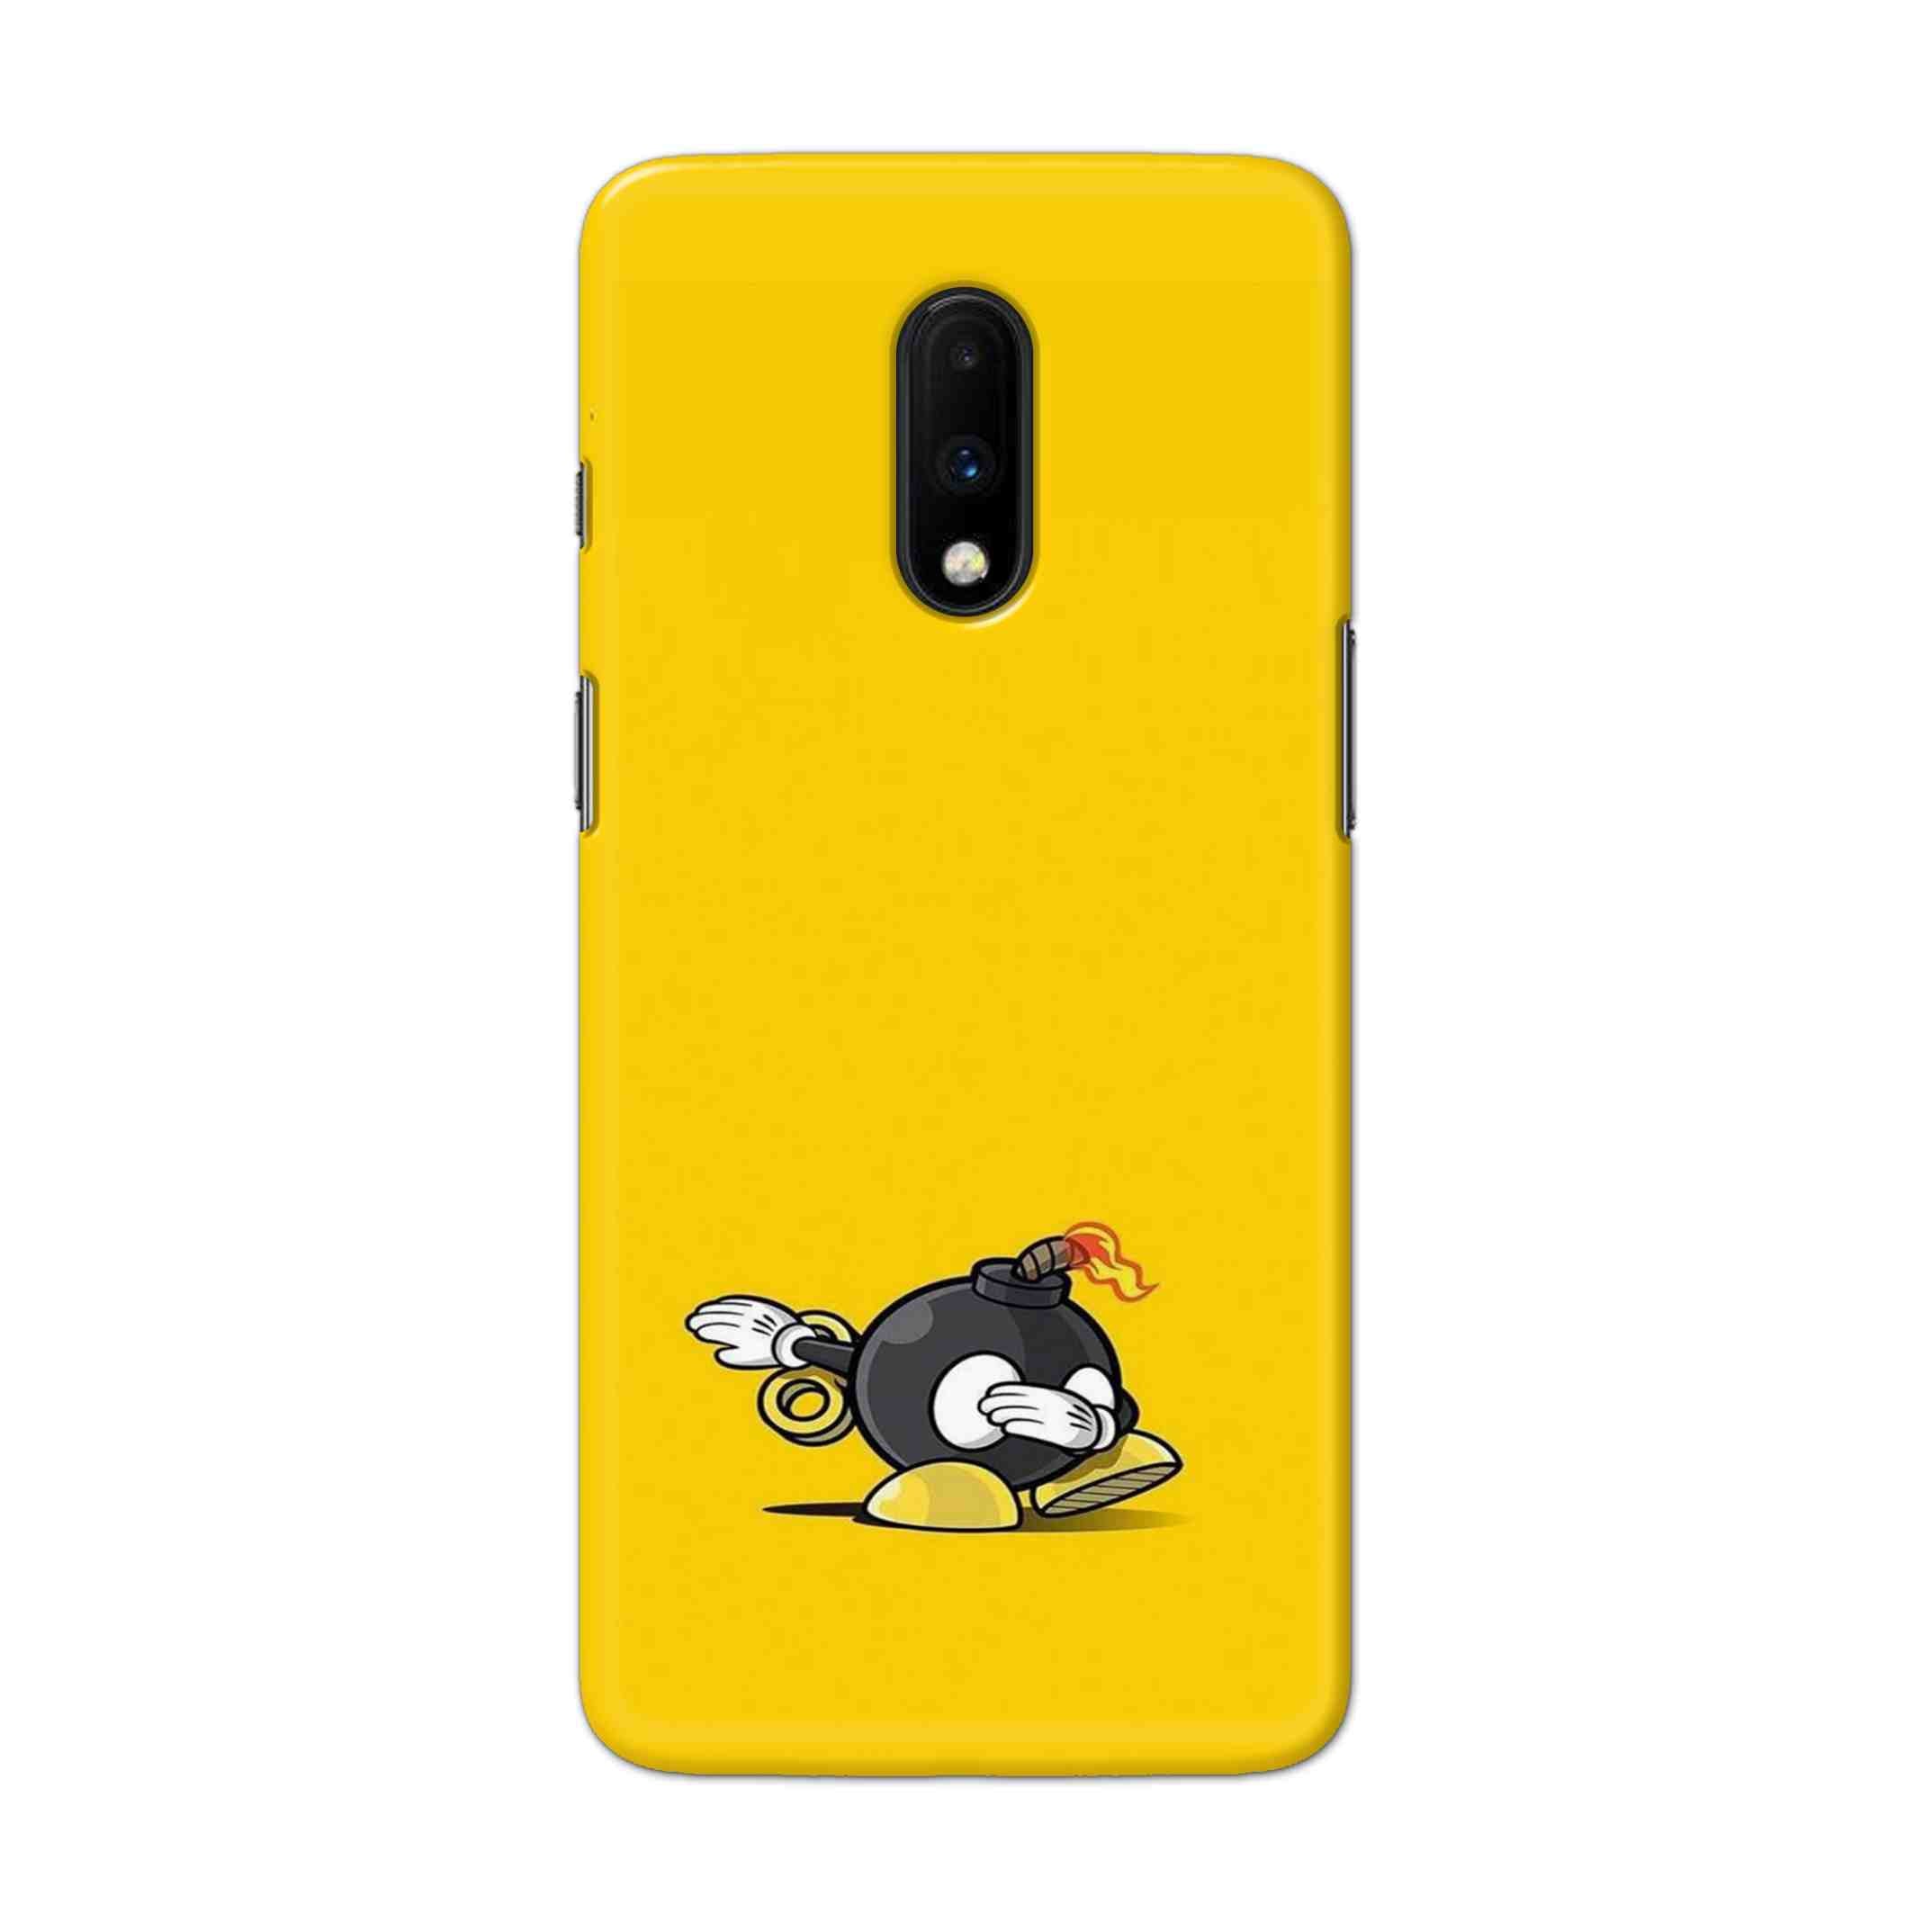 Buy Dashing Bomb Hard Back Mobile Phone Case Cover For OnePlus 7 Online